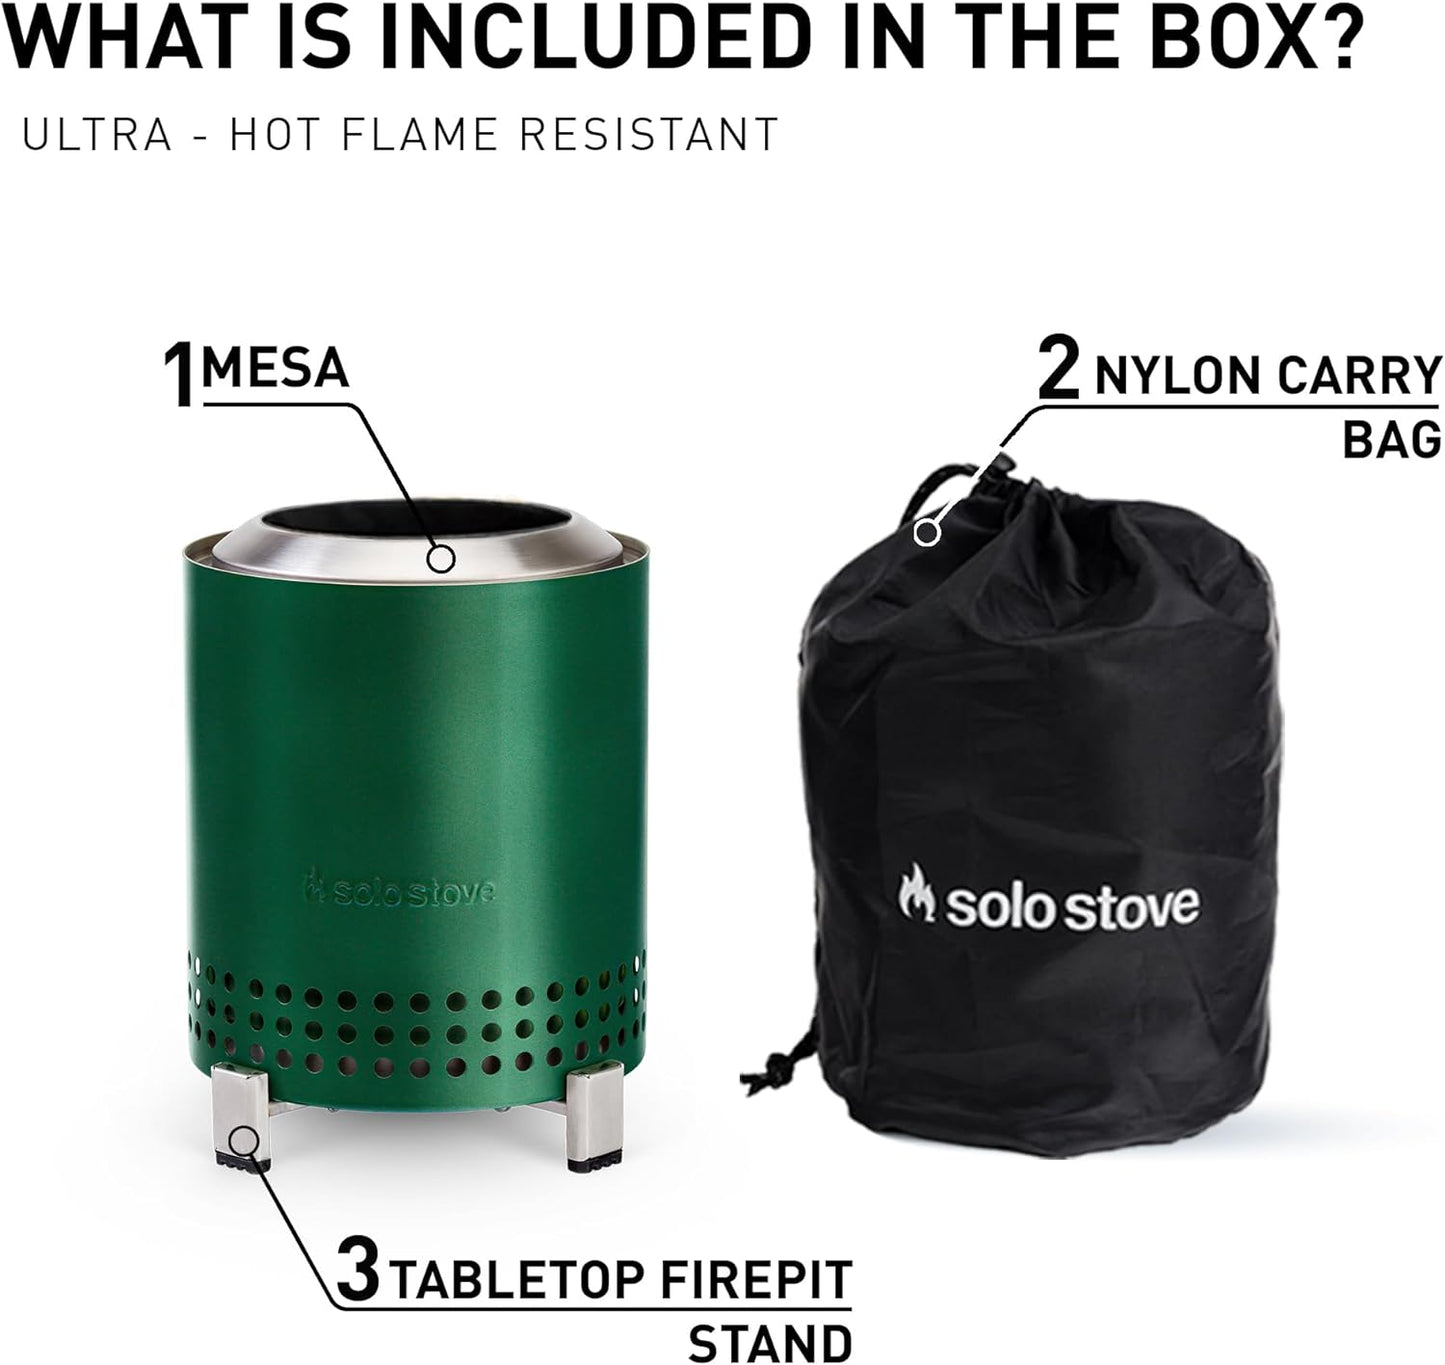 Solo Stove Mesa XL Tabletop Fire Pit with Stand | Low Smoke Outdoor Mini Fire for Urban & Suburbs | Fueled by Pellets or Wood, Stainless Steel, with Travel Bag, H: 8.6" x D: 7", 2.3 lbs, Green